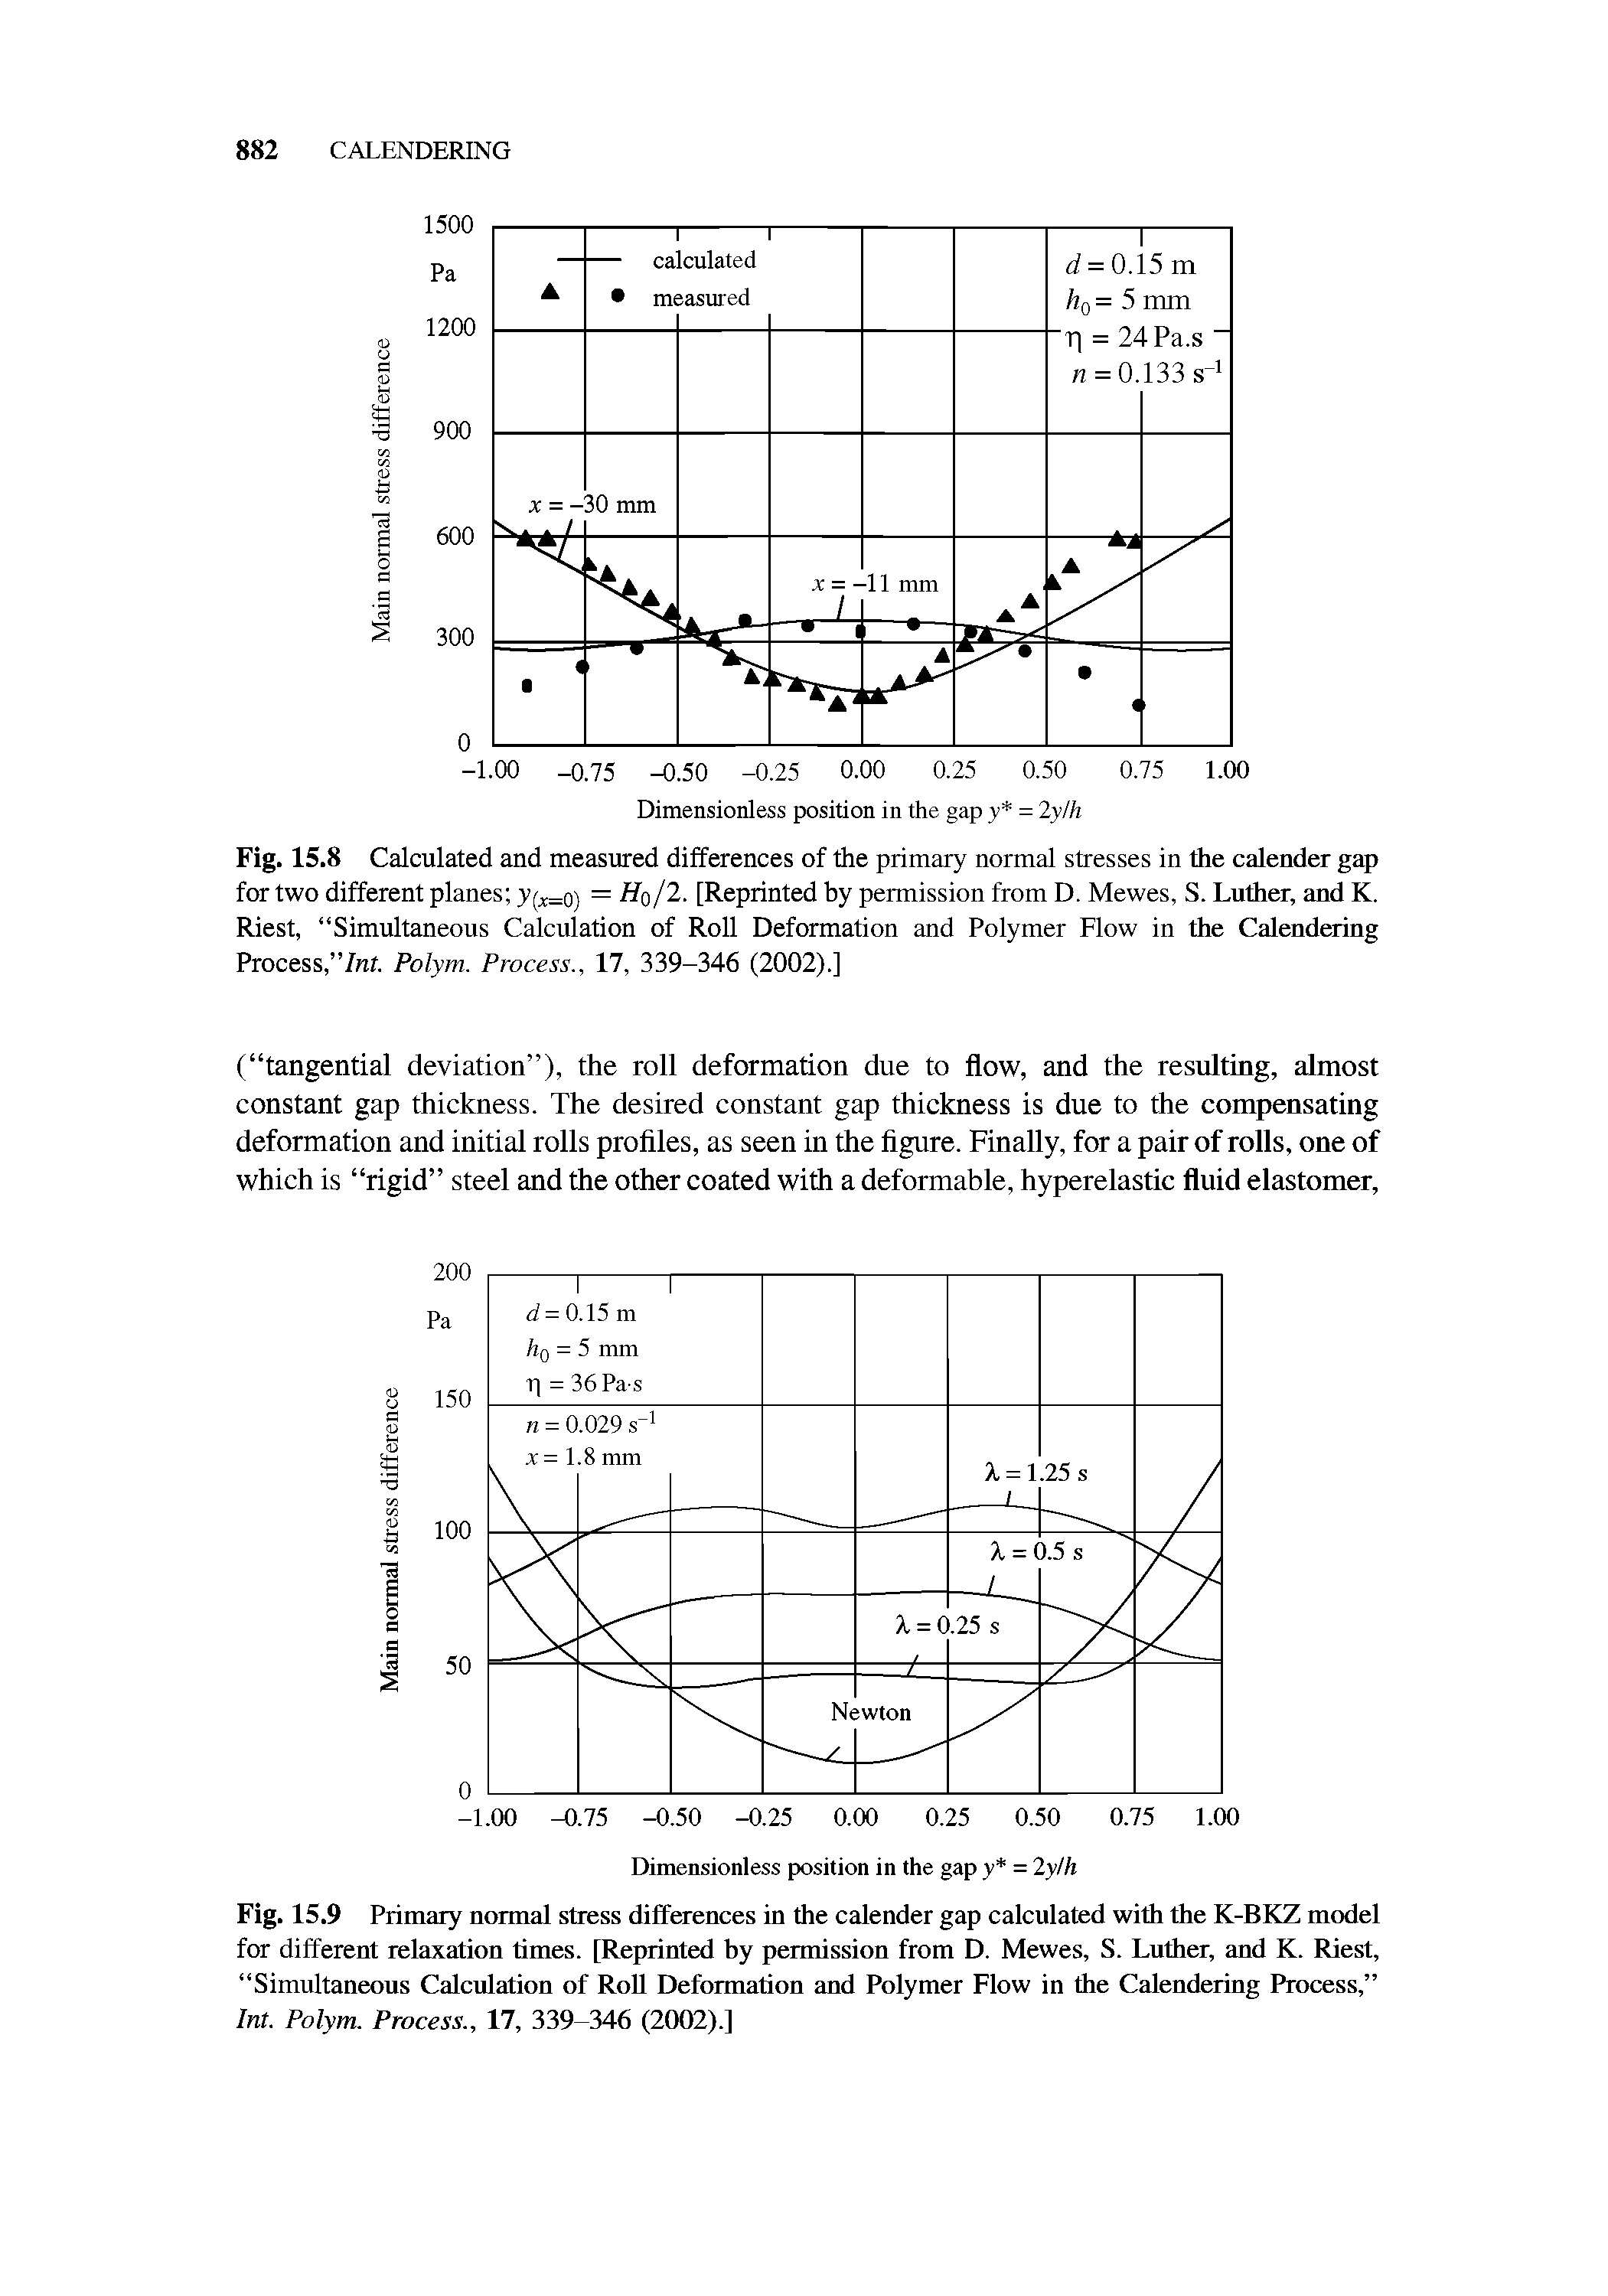 Fig. 15.9 Primary normal stress differences in the calender gap calculated with the K-BKZ model for different relaxation times. [Reprinted by permission from D. Mewes, S. Luther, and K. Riest, Simultaneous Calculation of Roll Deformation and Polymer Flow in the Calendering Process, Int. Polym. Process., 17, 339-346 (2002).]...